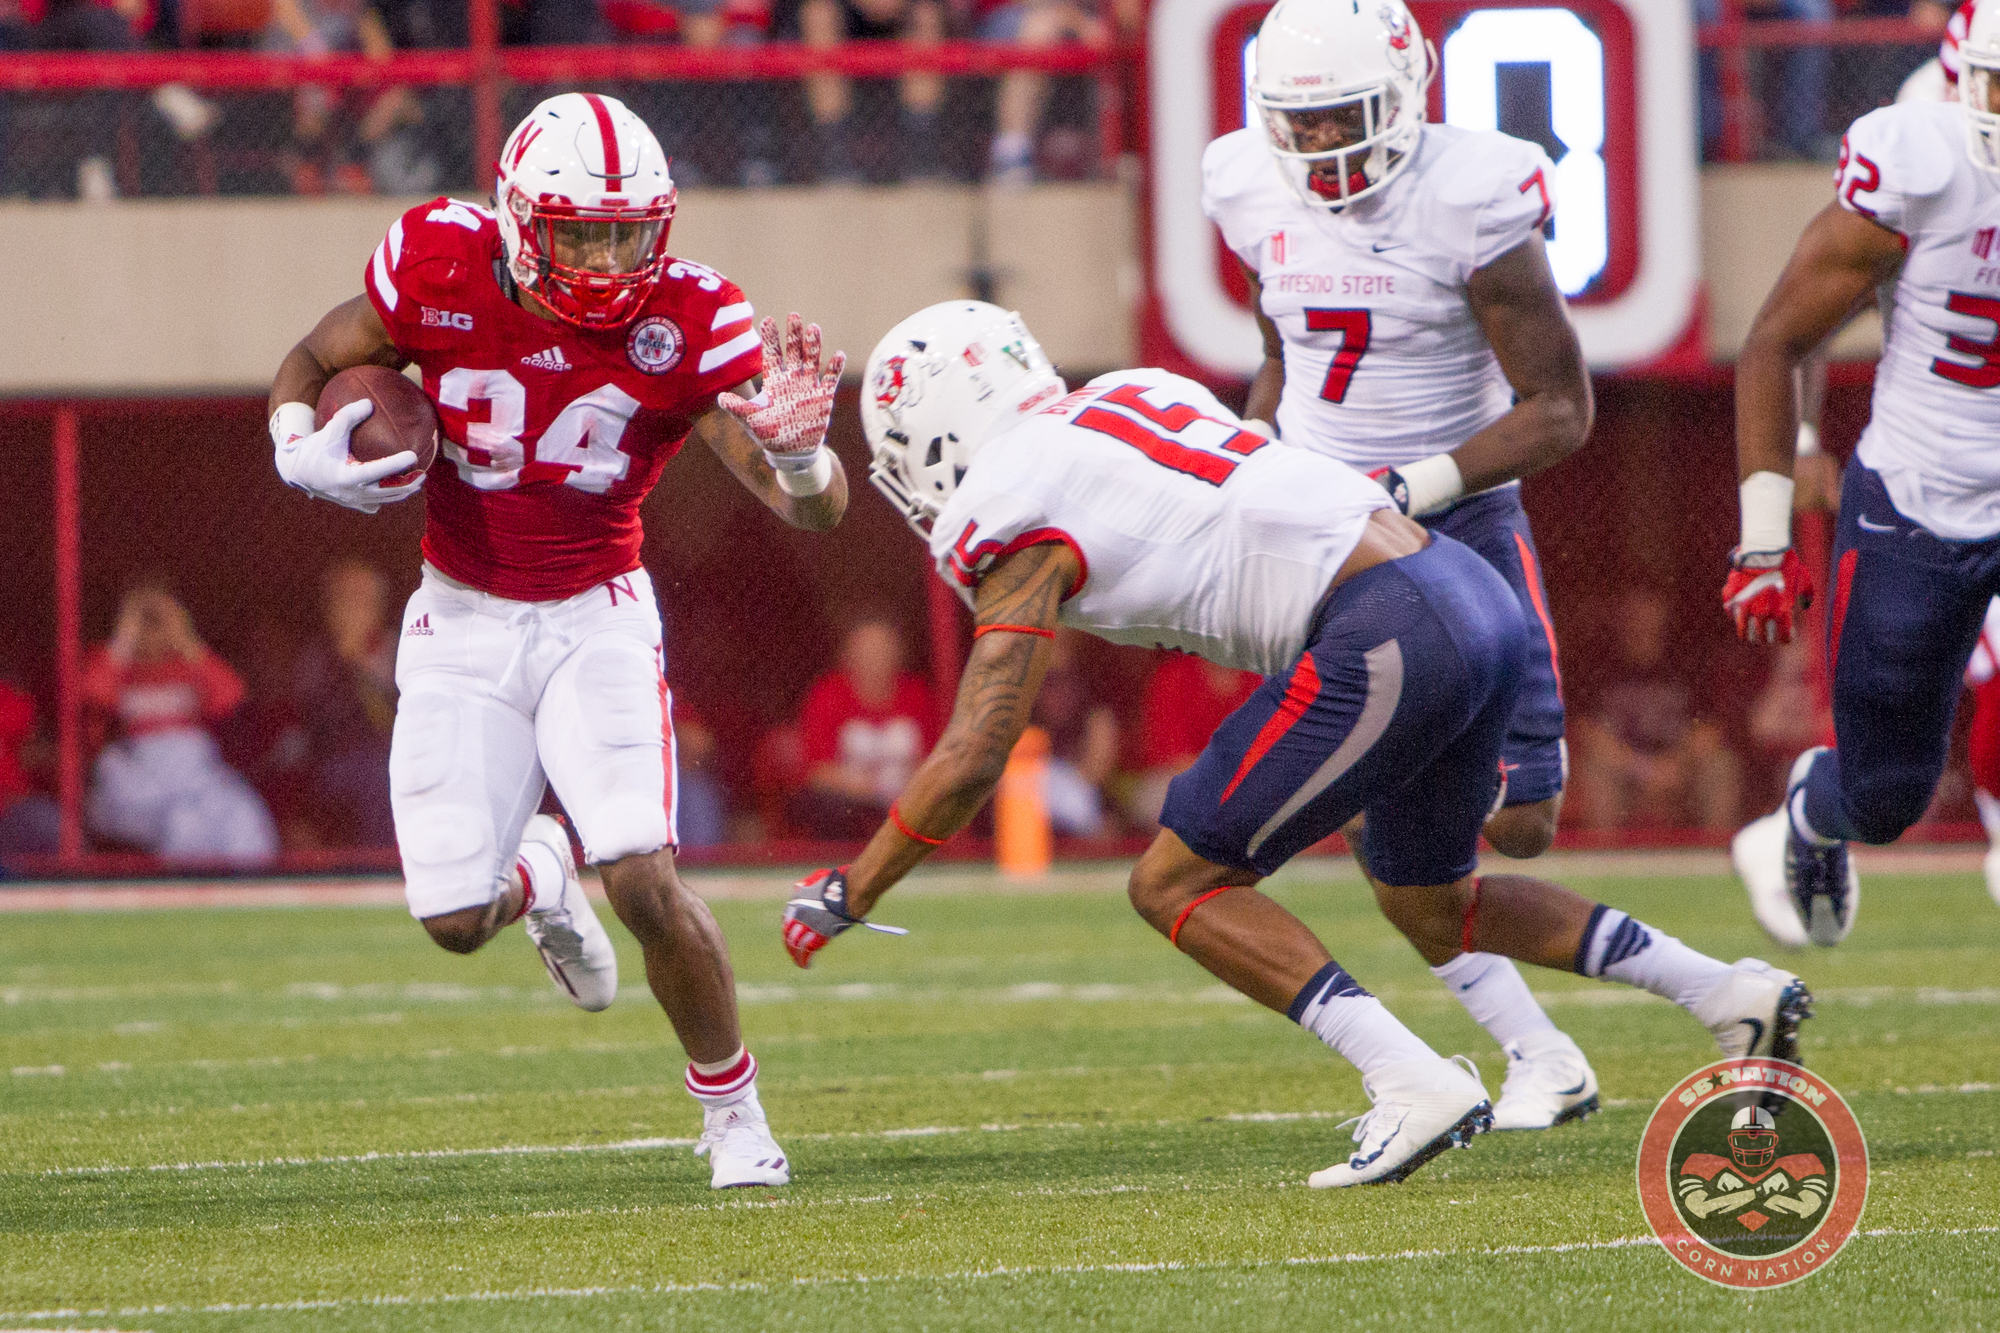 Gallery: Huskers Open Season with Win over Fresno St.